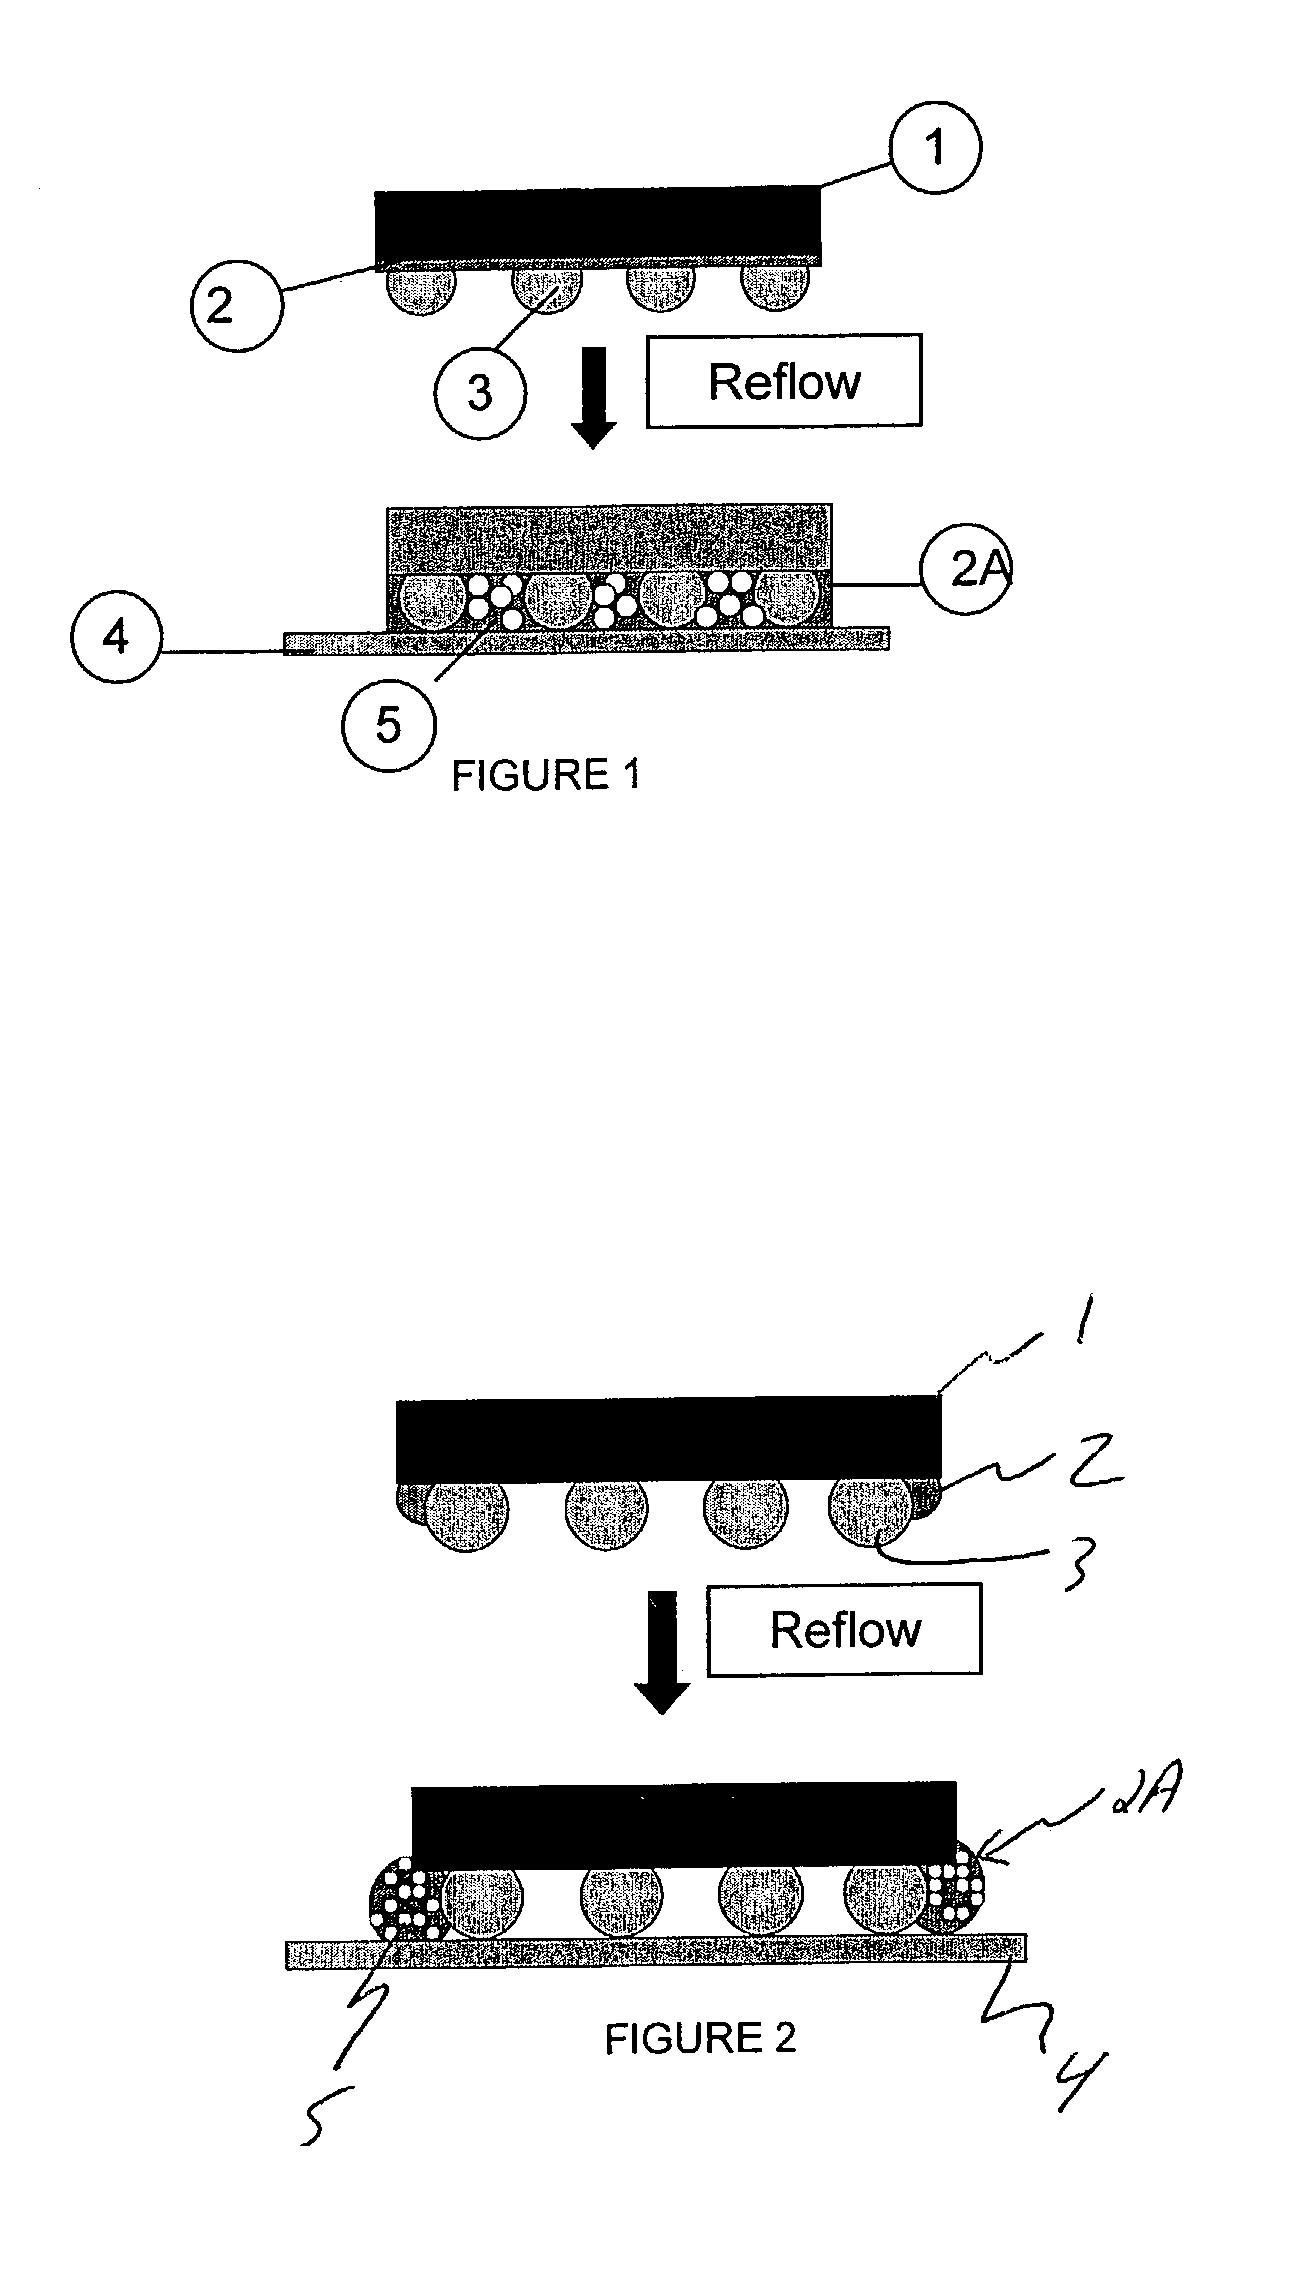 Method of using pre-applied underfill encapsulant